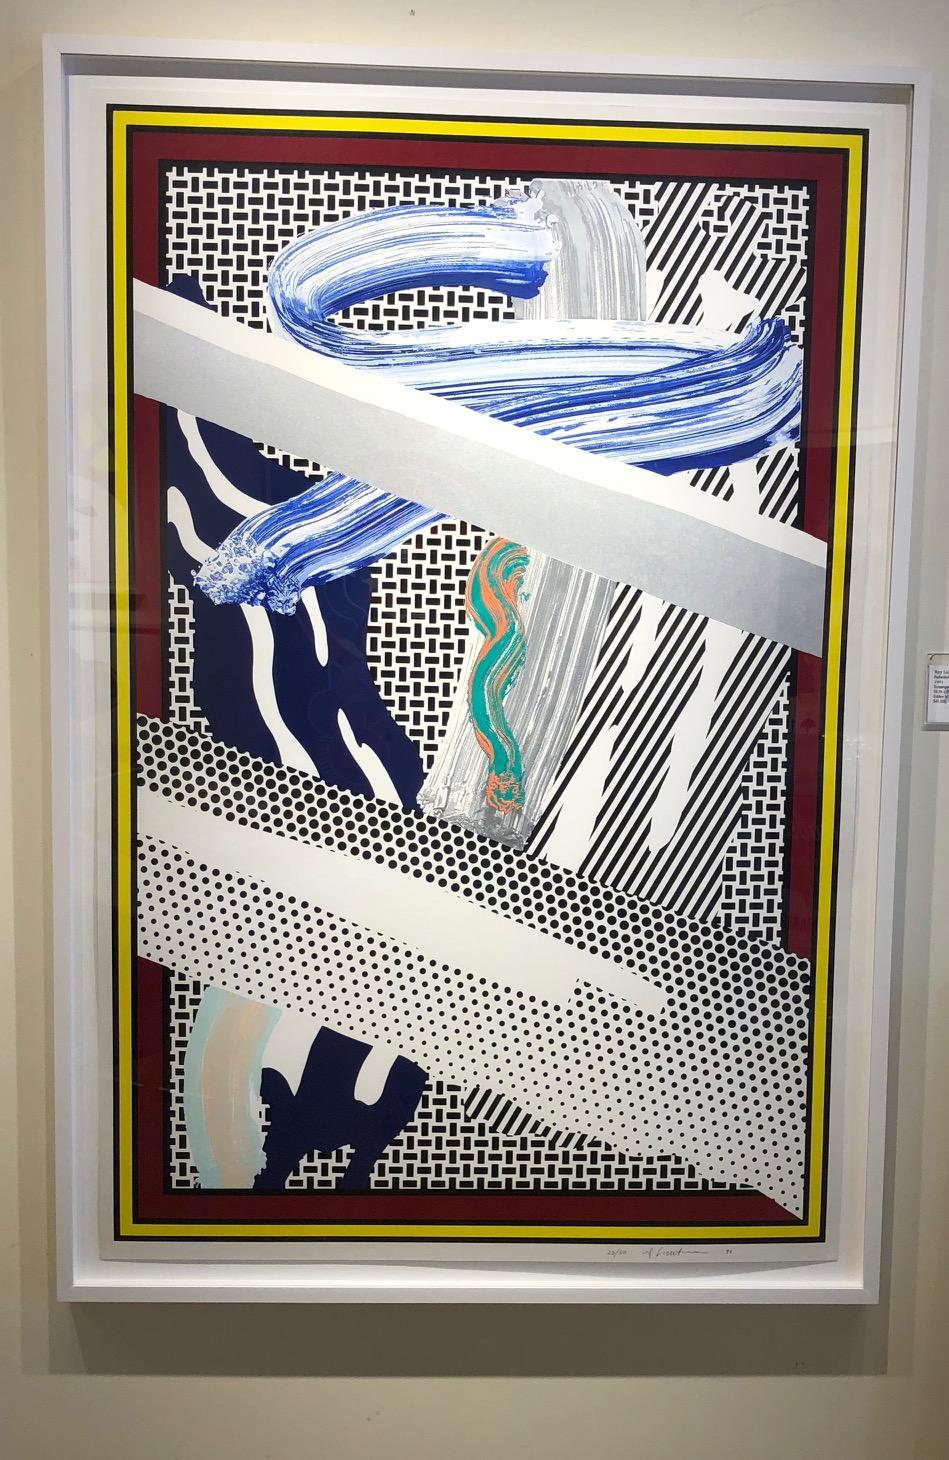 Reflections on Expressionist Painting - Print by Roy Lichtenstein